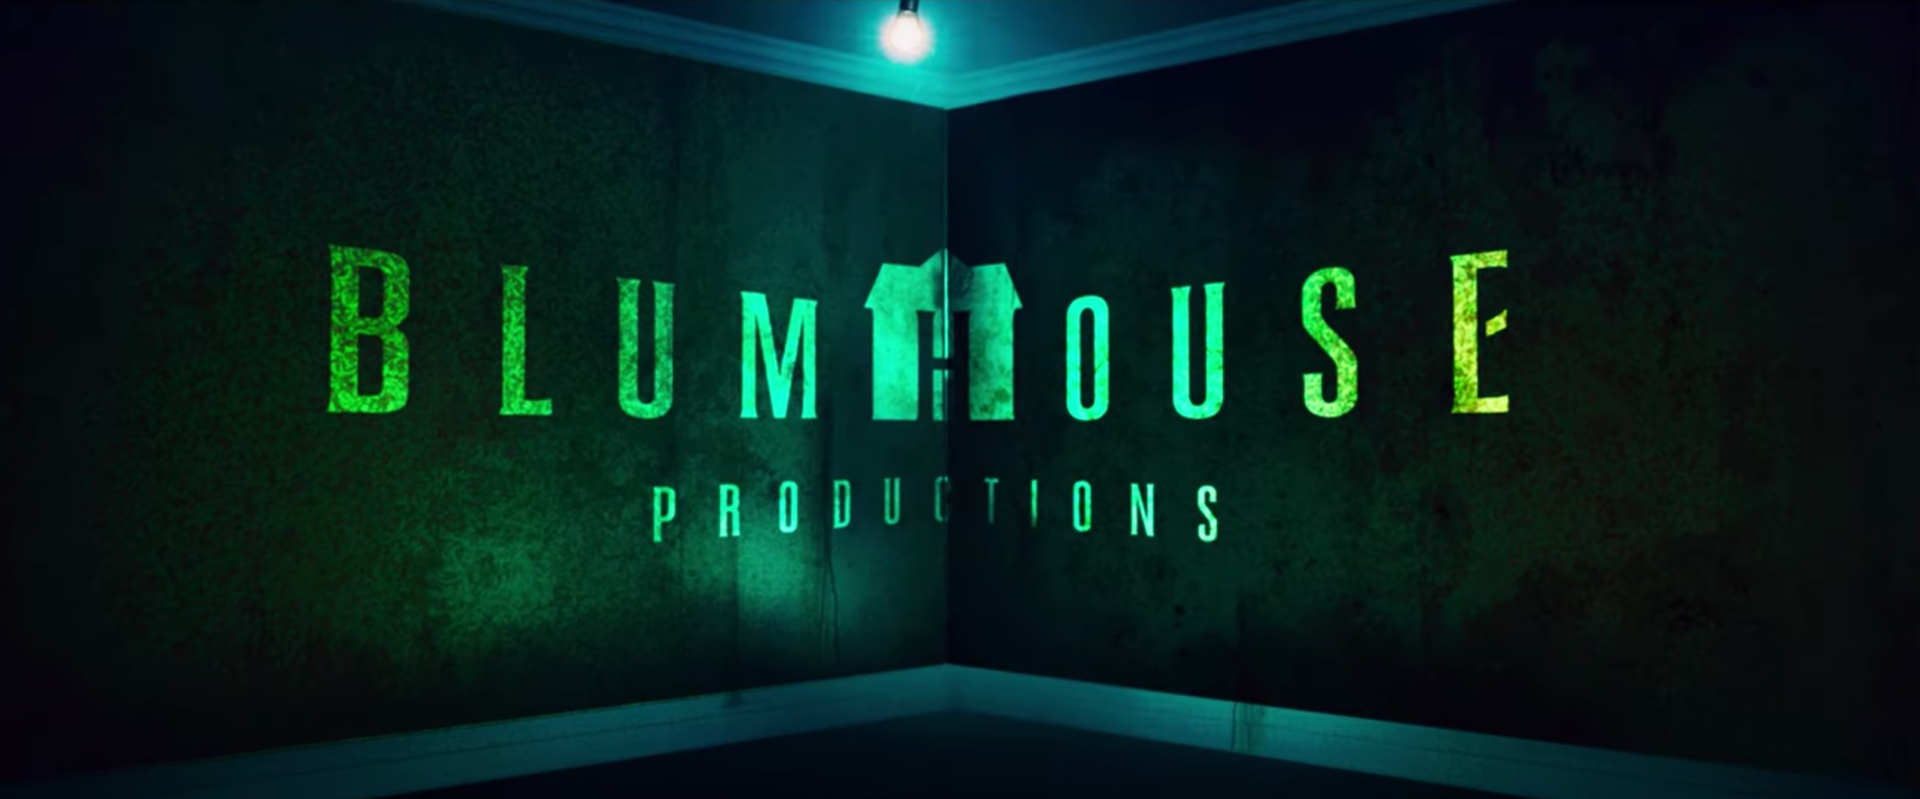 News: Blumhouse and Atomic Monster join forces - Moviehooker